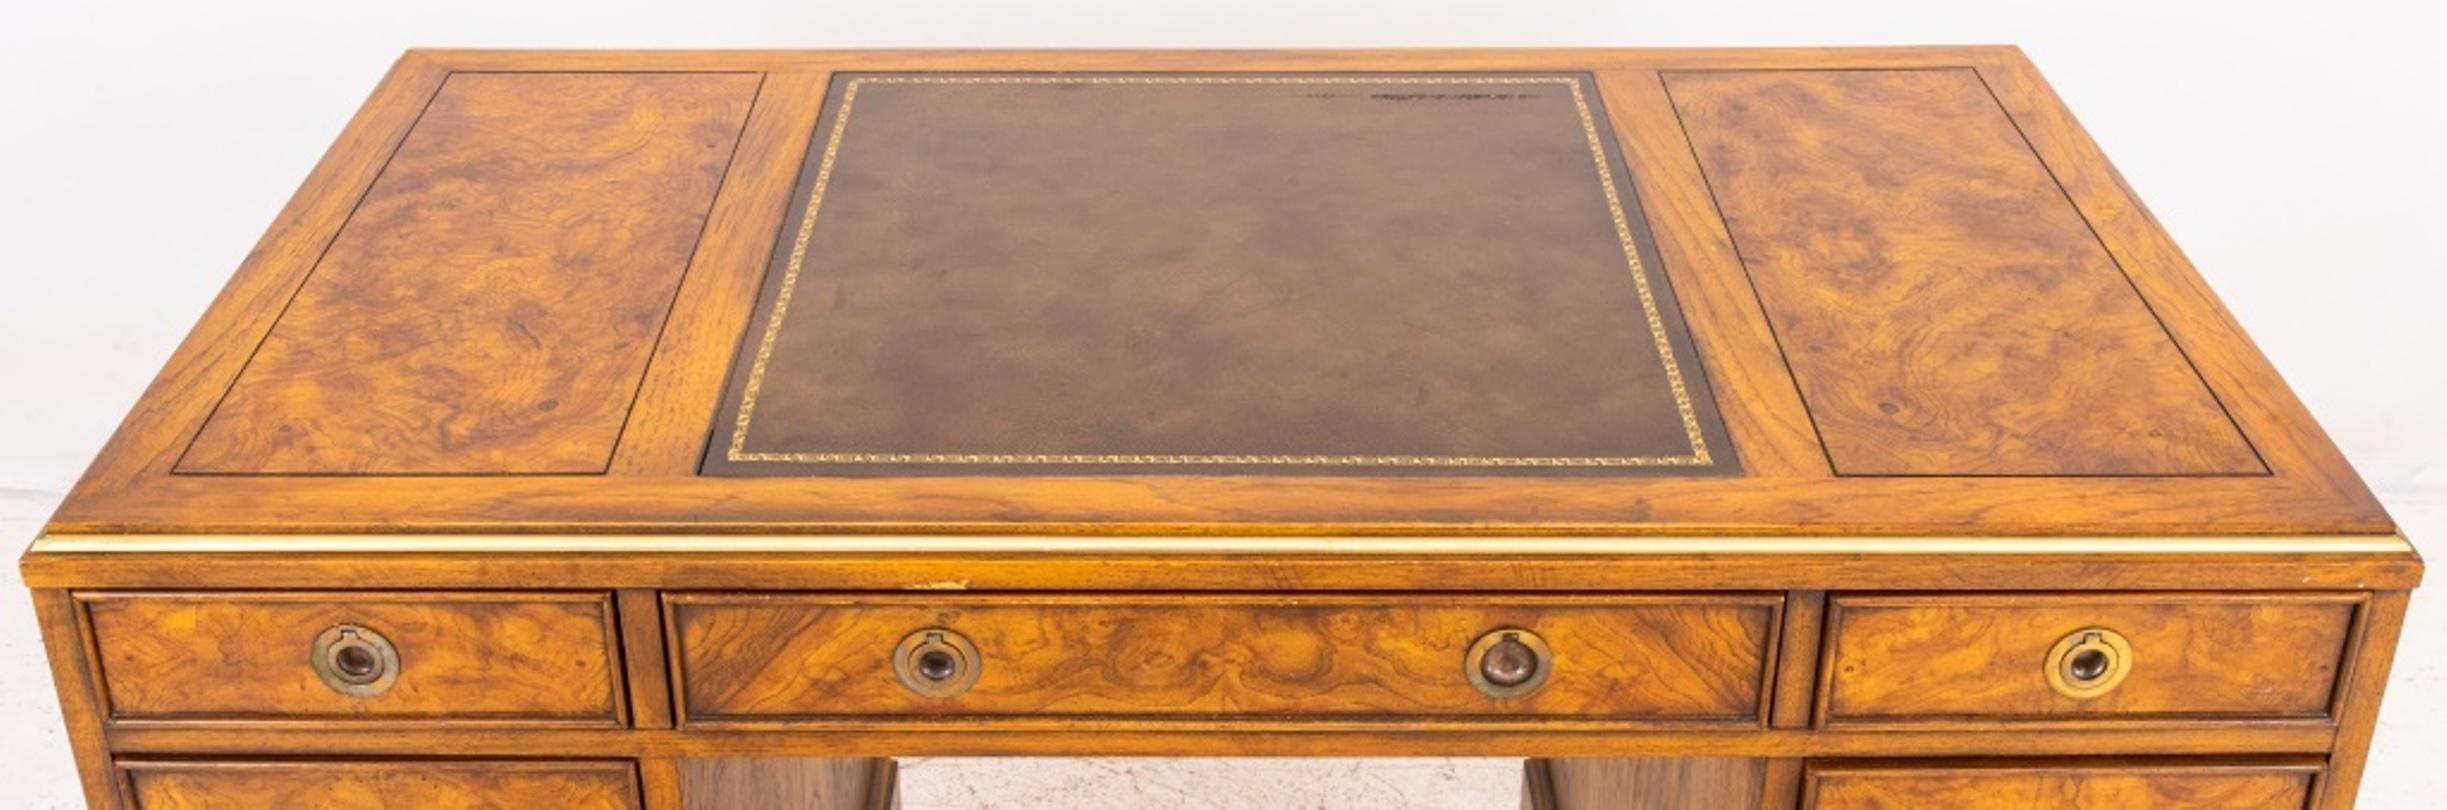 Drexel Campaign style oak desk raised on double pedestal with drawers, gilt metal handles, brown leather embossed writing desk top, 